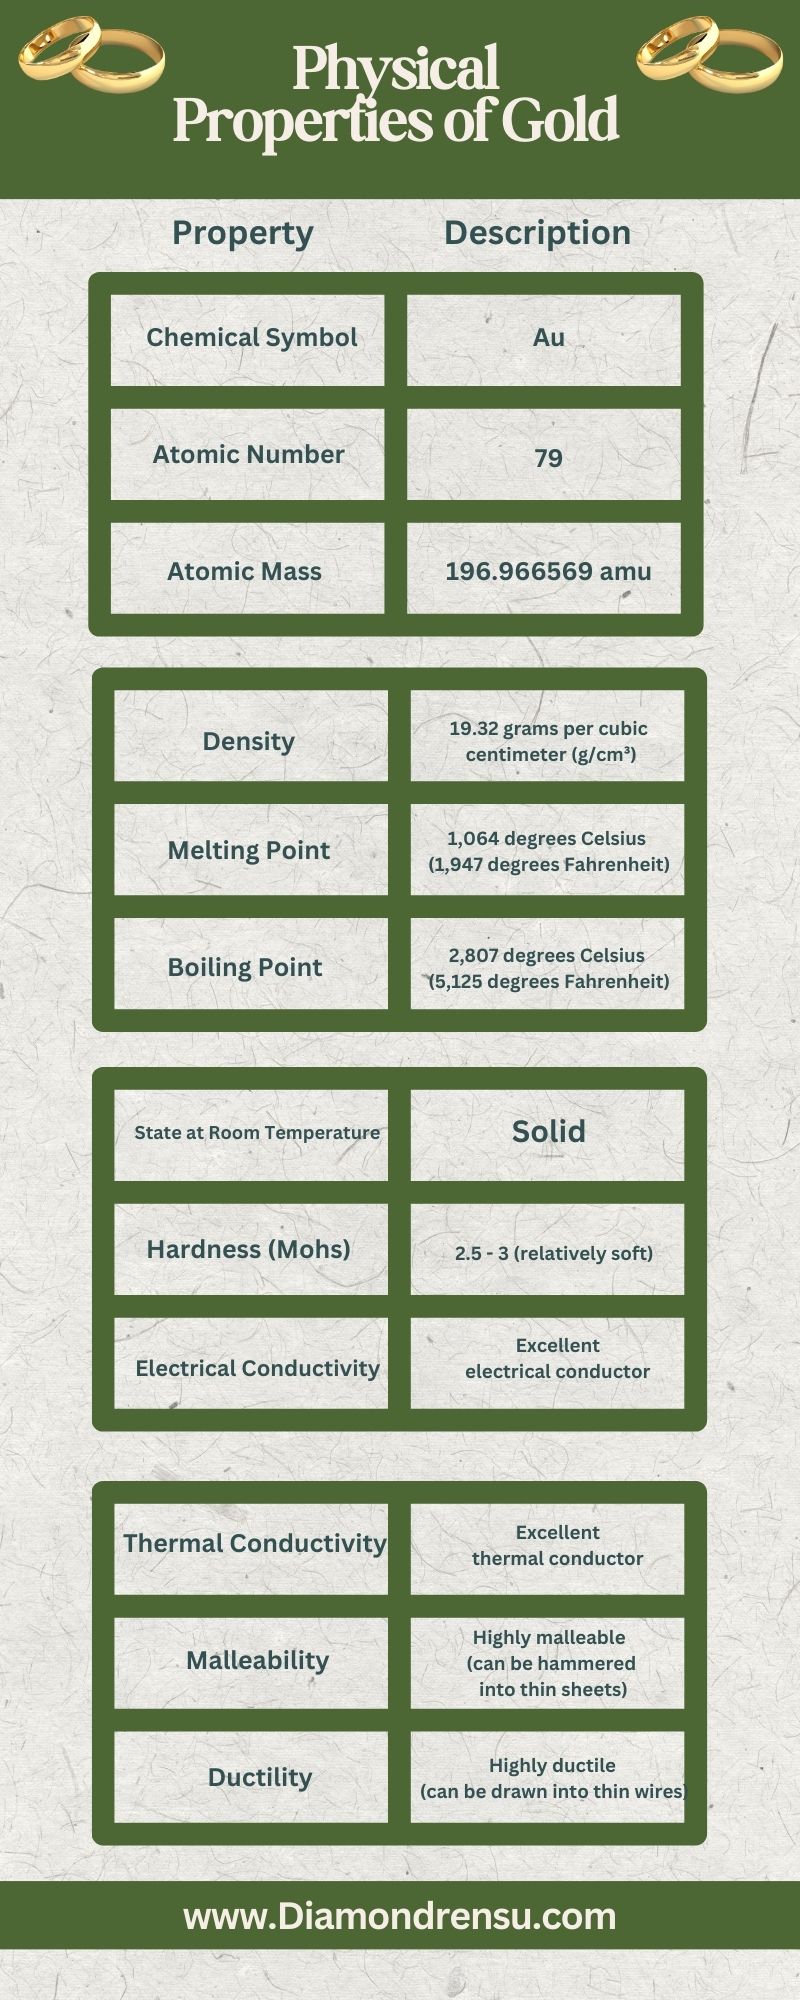 Physical Properties of Gold Infographic